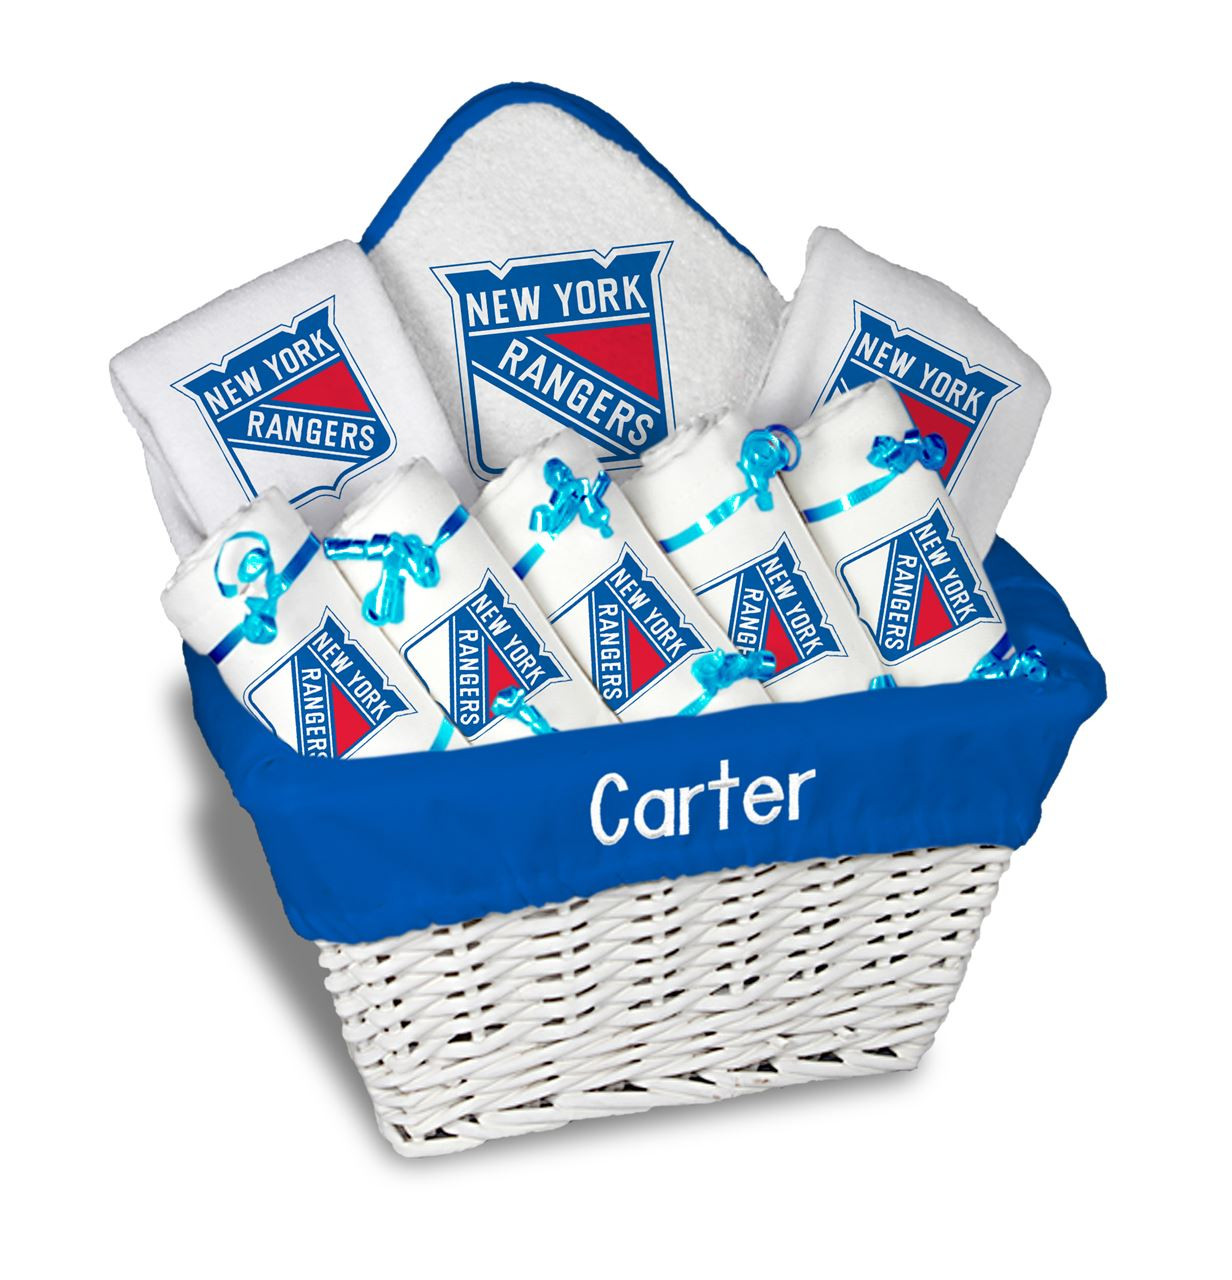 New York Baby Gifts
 Personalized New York Rangers Gift Basket